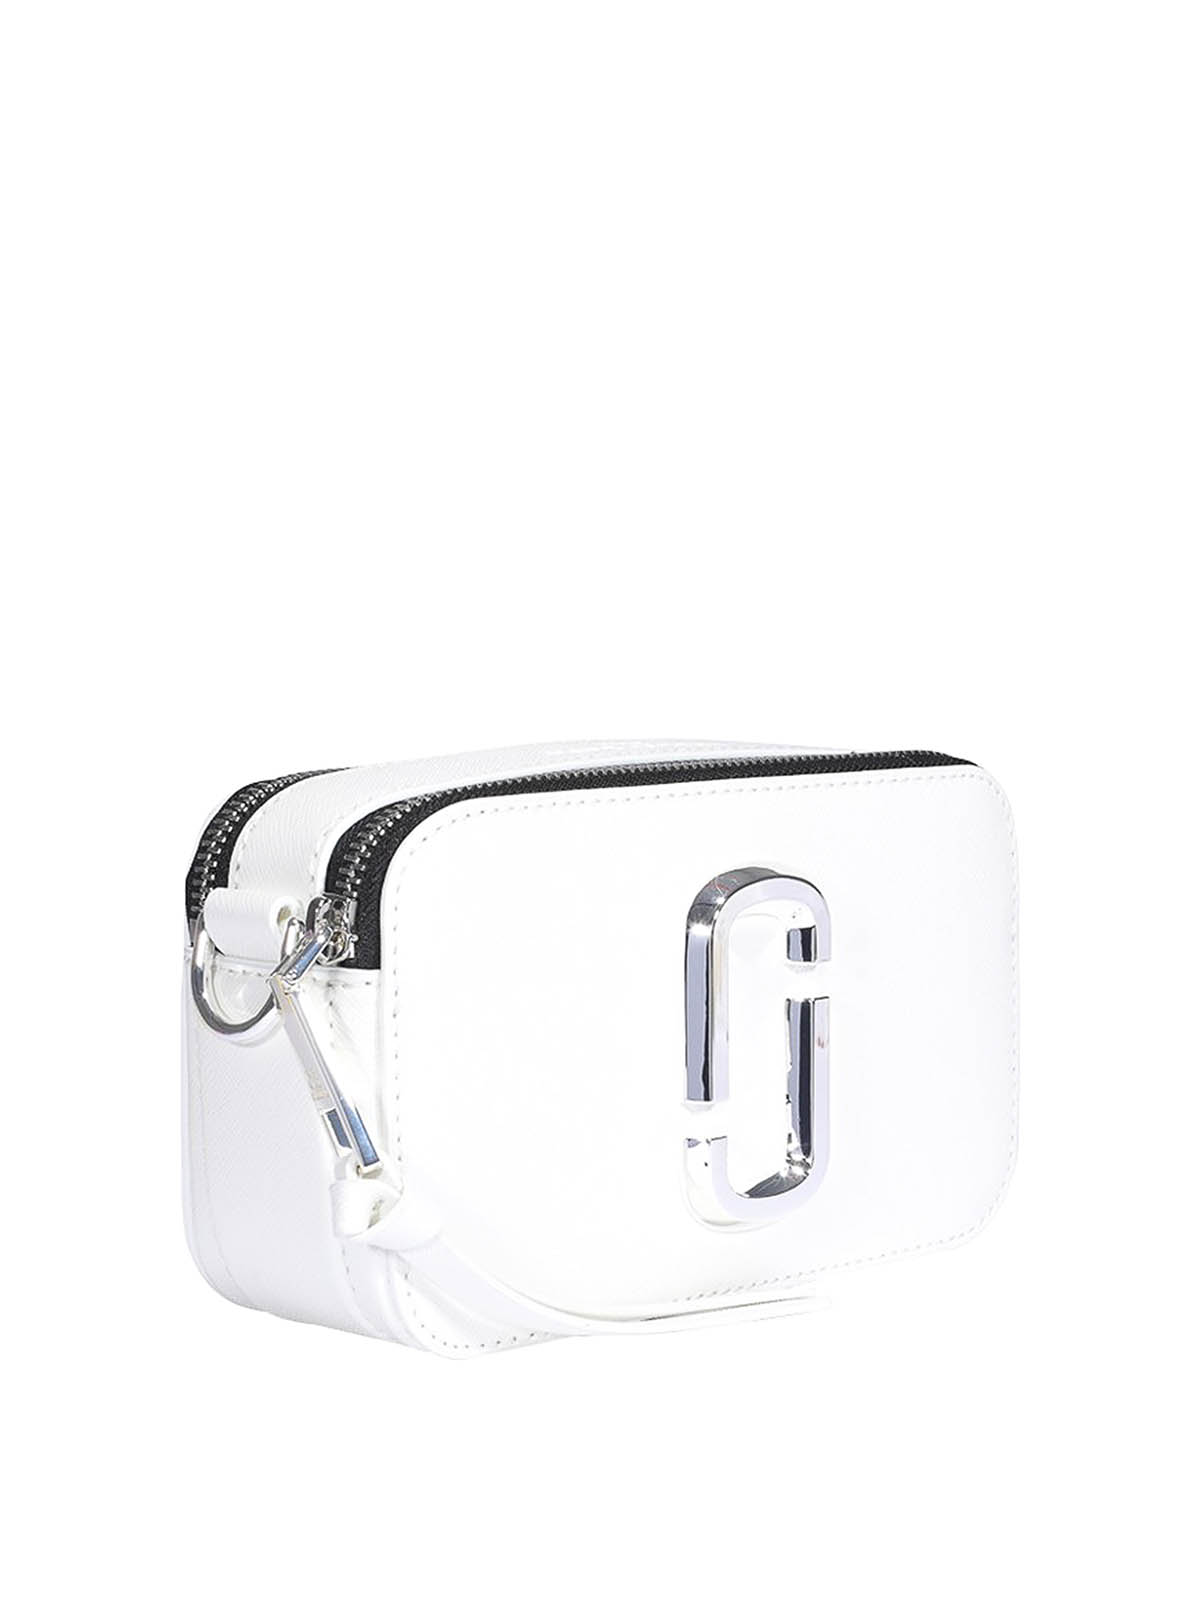 Marc Jacobs The Snapshot Saffiano Leather Cross Body Bag